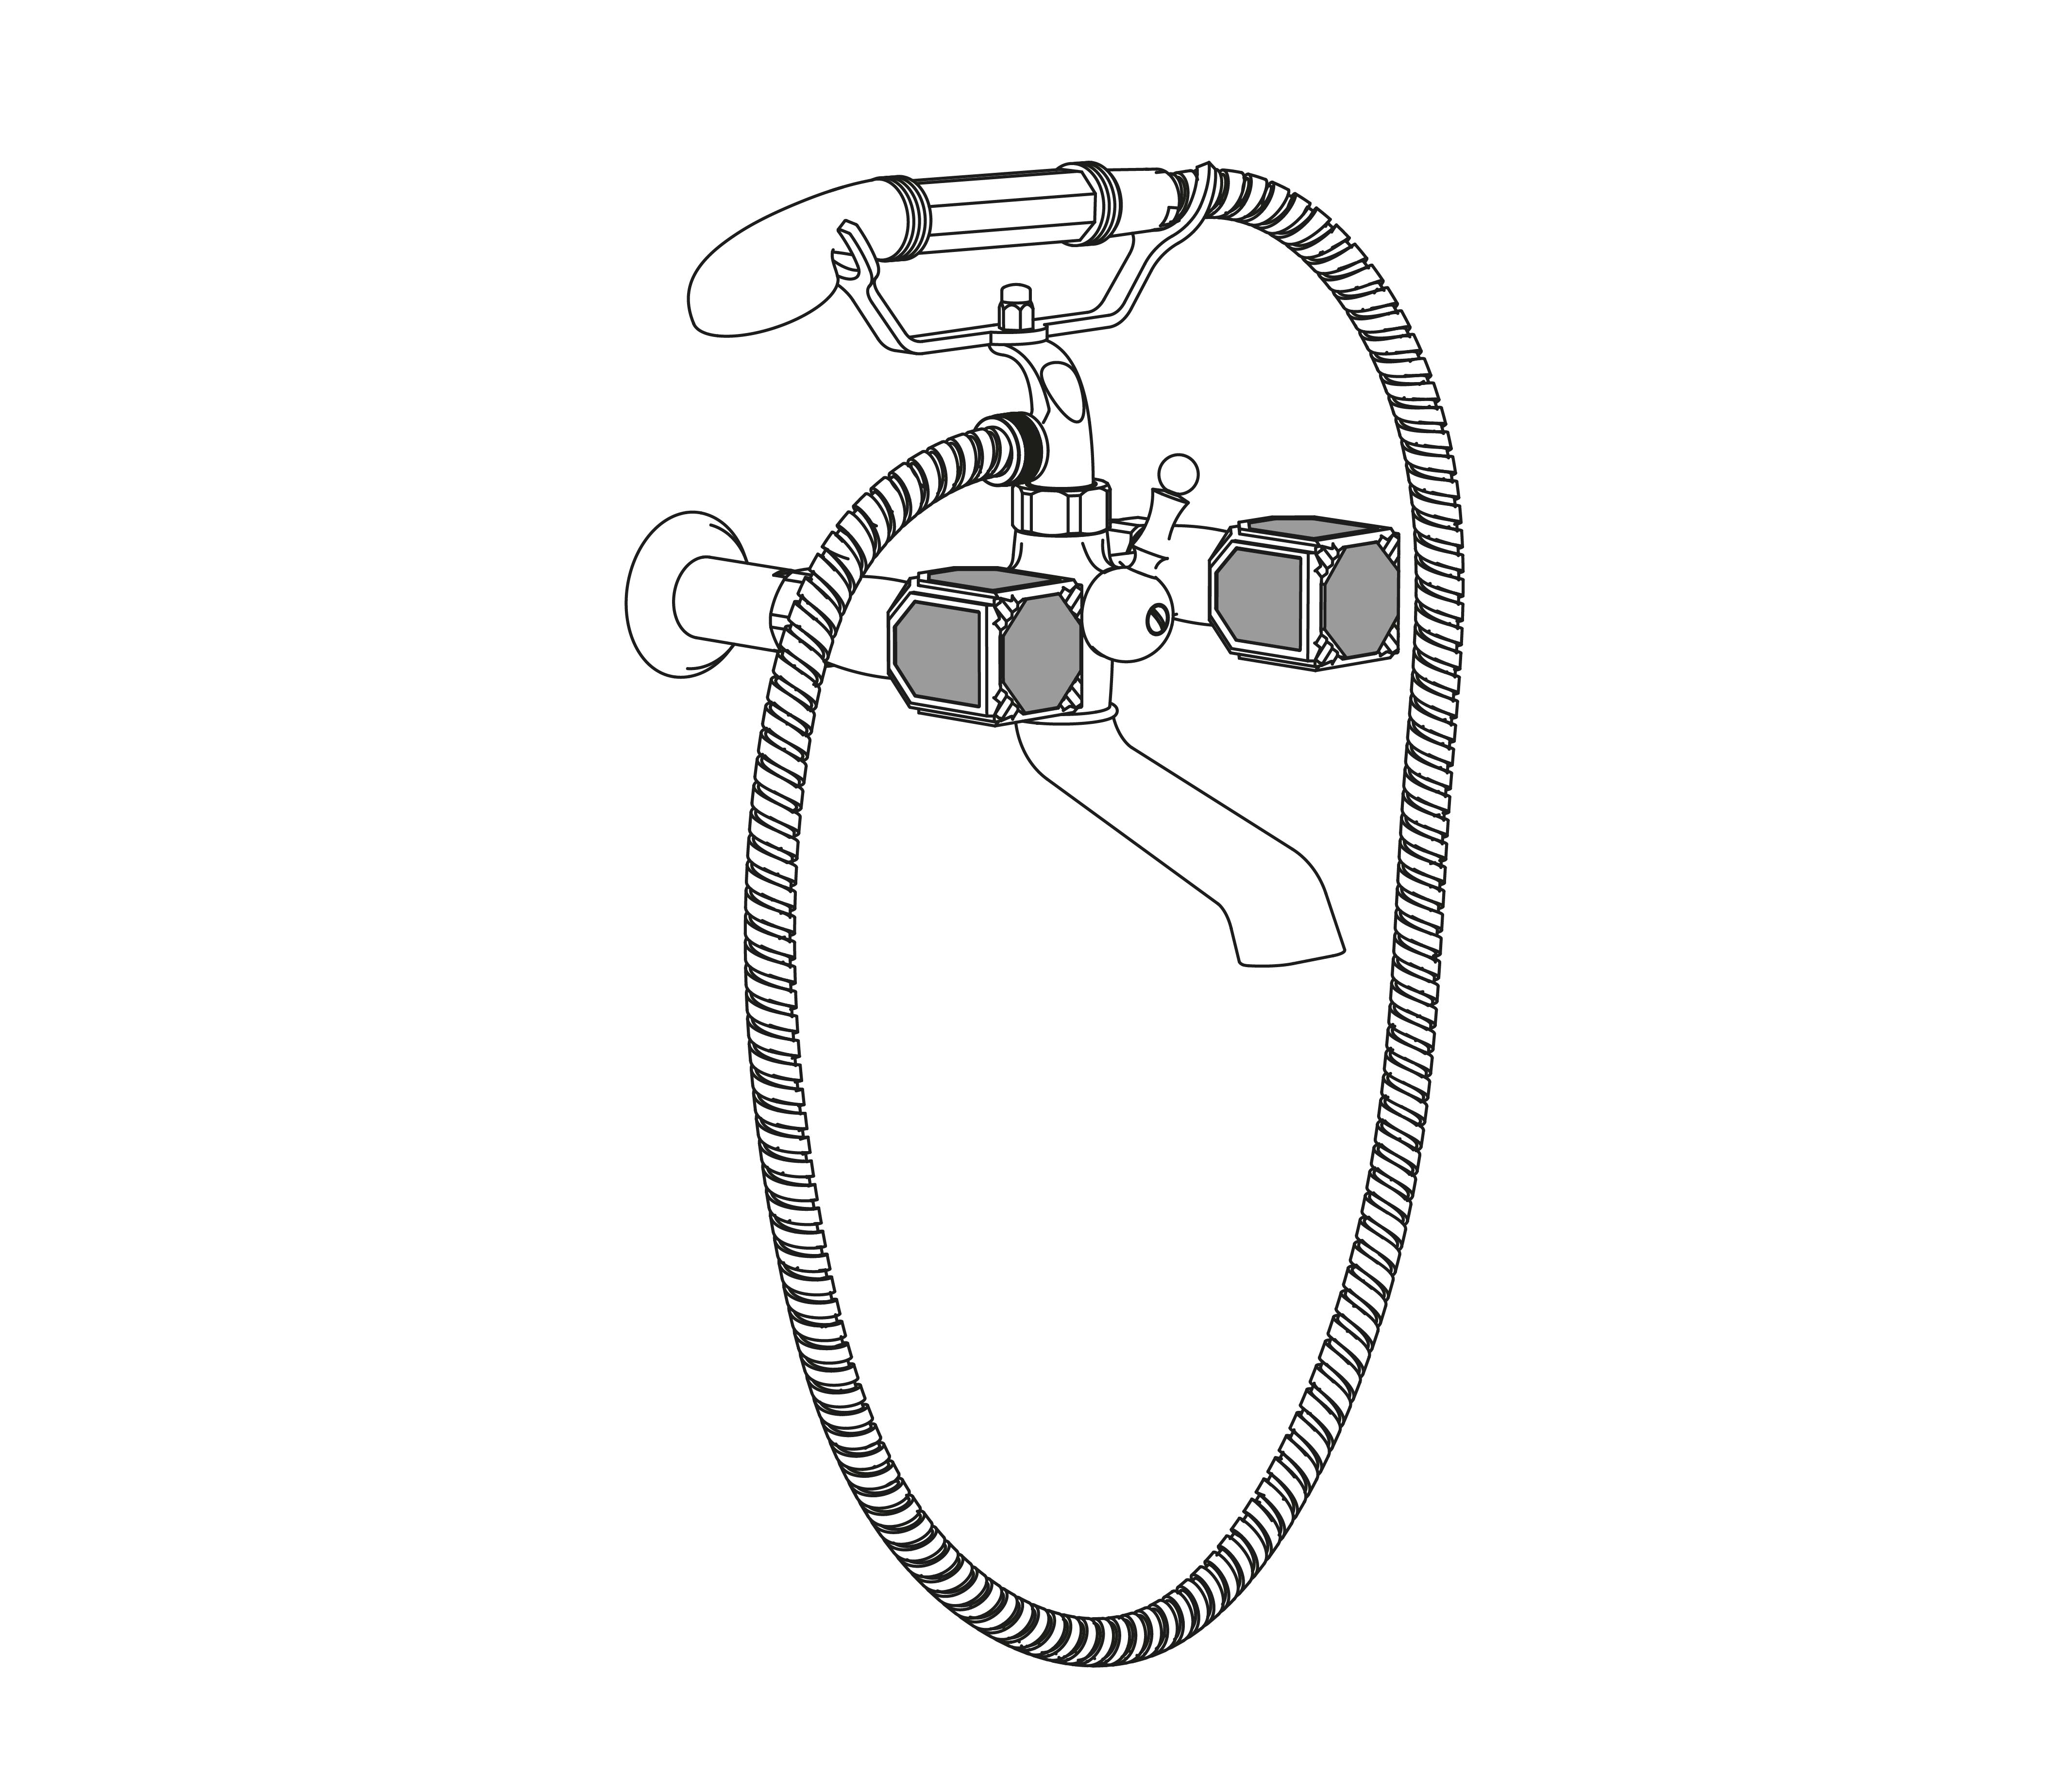 S68-3201 Wall mounted bath and shower mixer